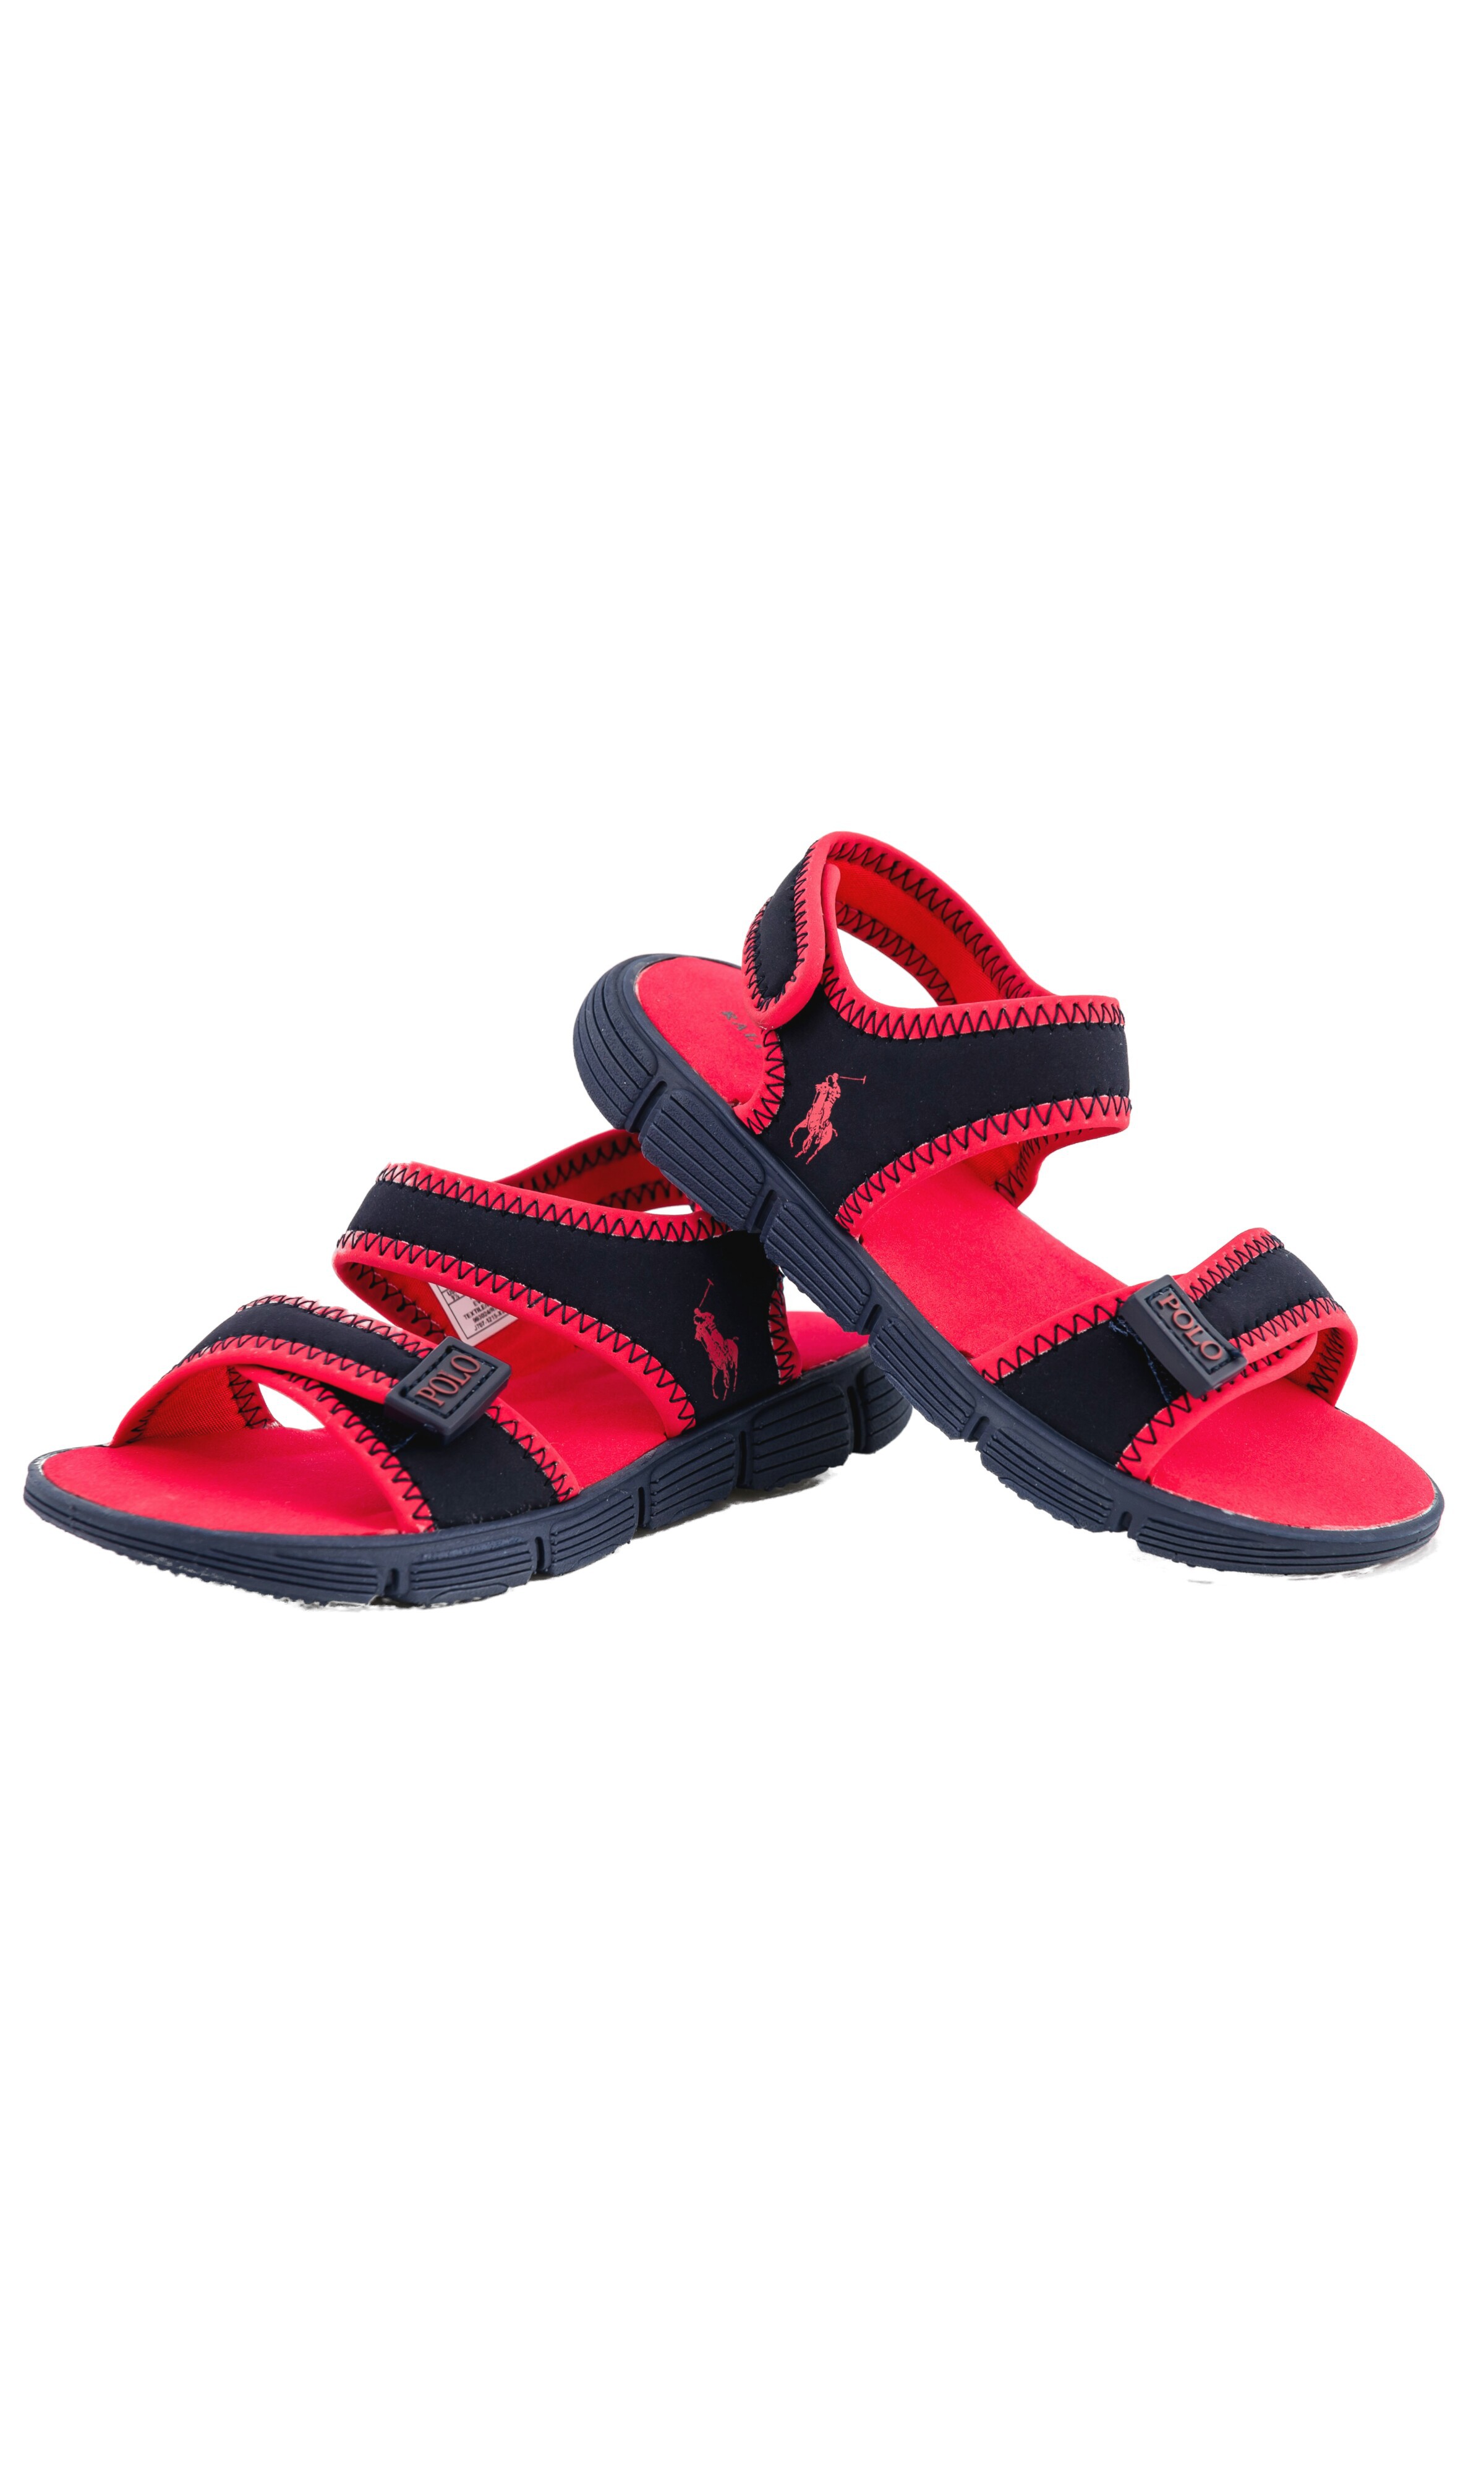 blue and red sandals